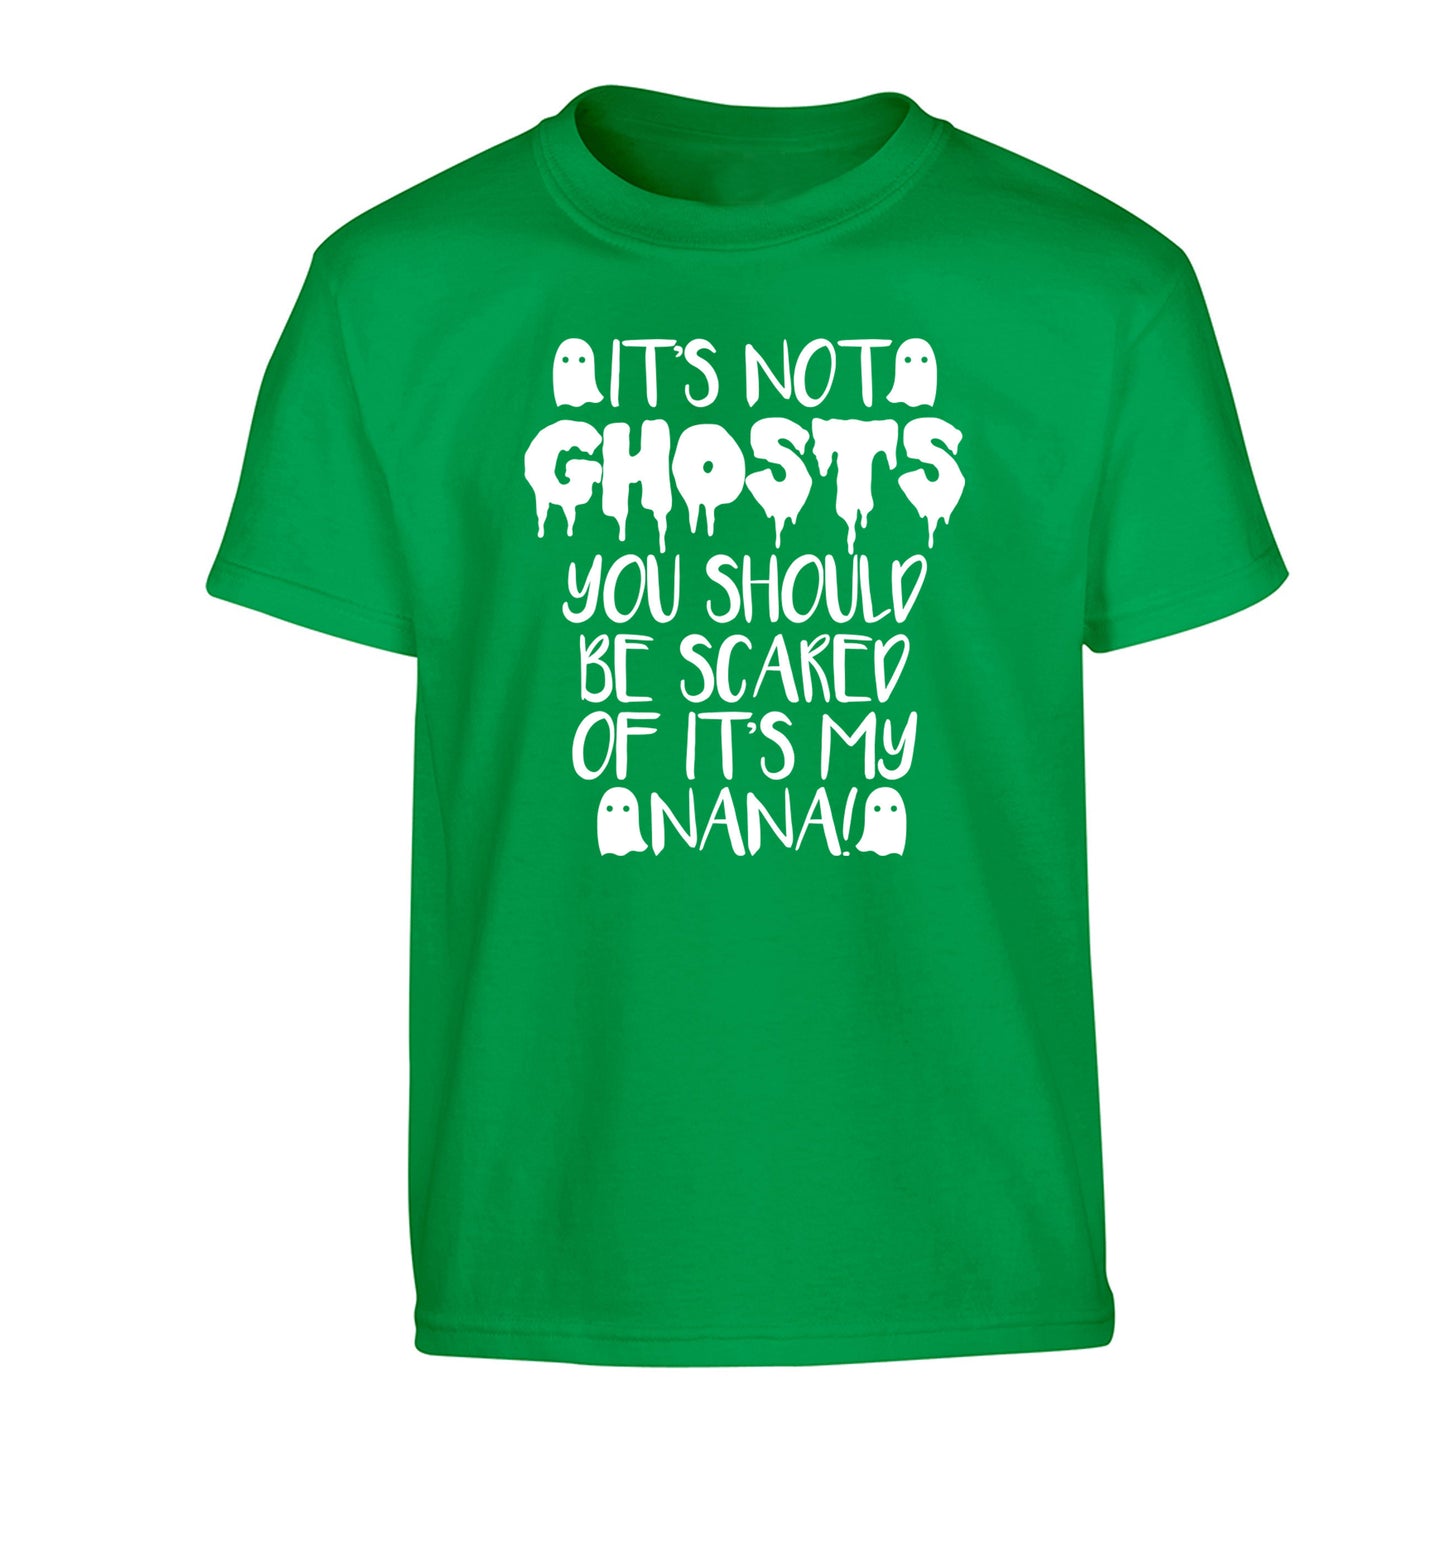 It's not ghosts you should be scared of it's my nana! Children's green Tshirt 12-14 Years